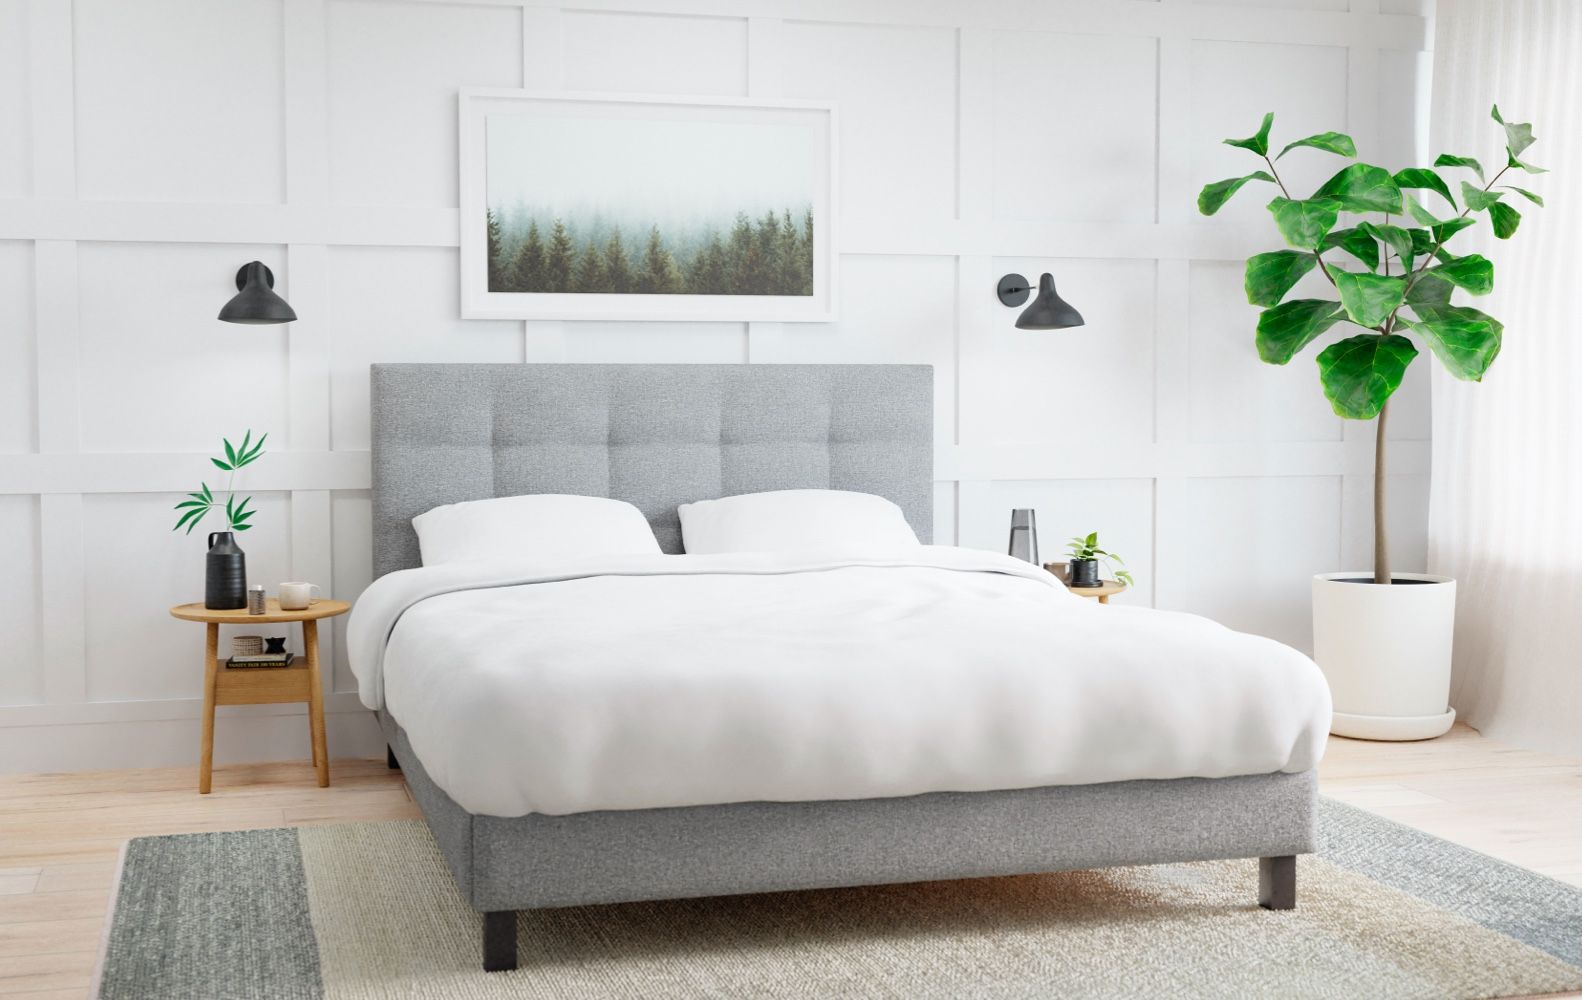 A bedroom vignette prominently featuring the Endy Upholstered Bed frame